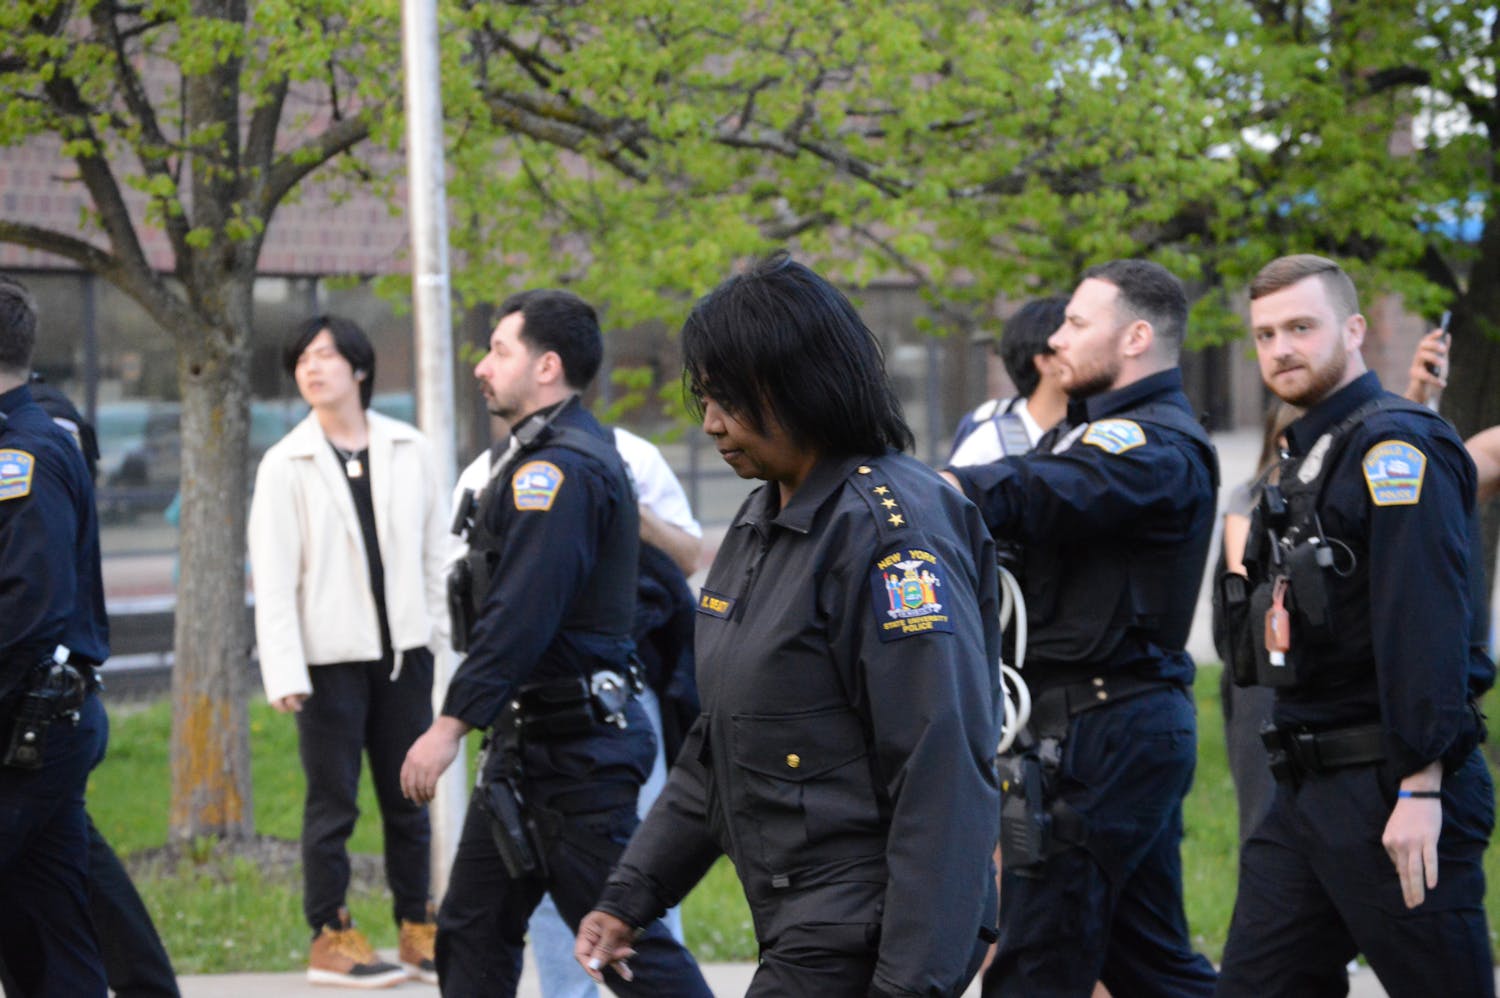 University Police (UPD) Chief Kim Beaty, pictured above, attended the May 1 protests alongside officers from a variety of departments. The Faculty Senate voted to condemn bringing outside law enforcement to peaceful protests.&nbsp;